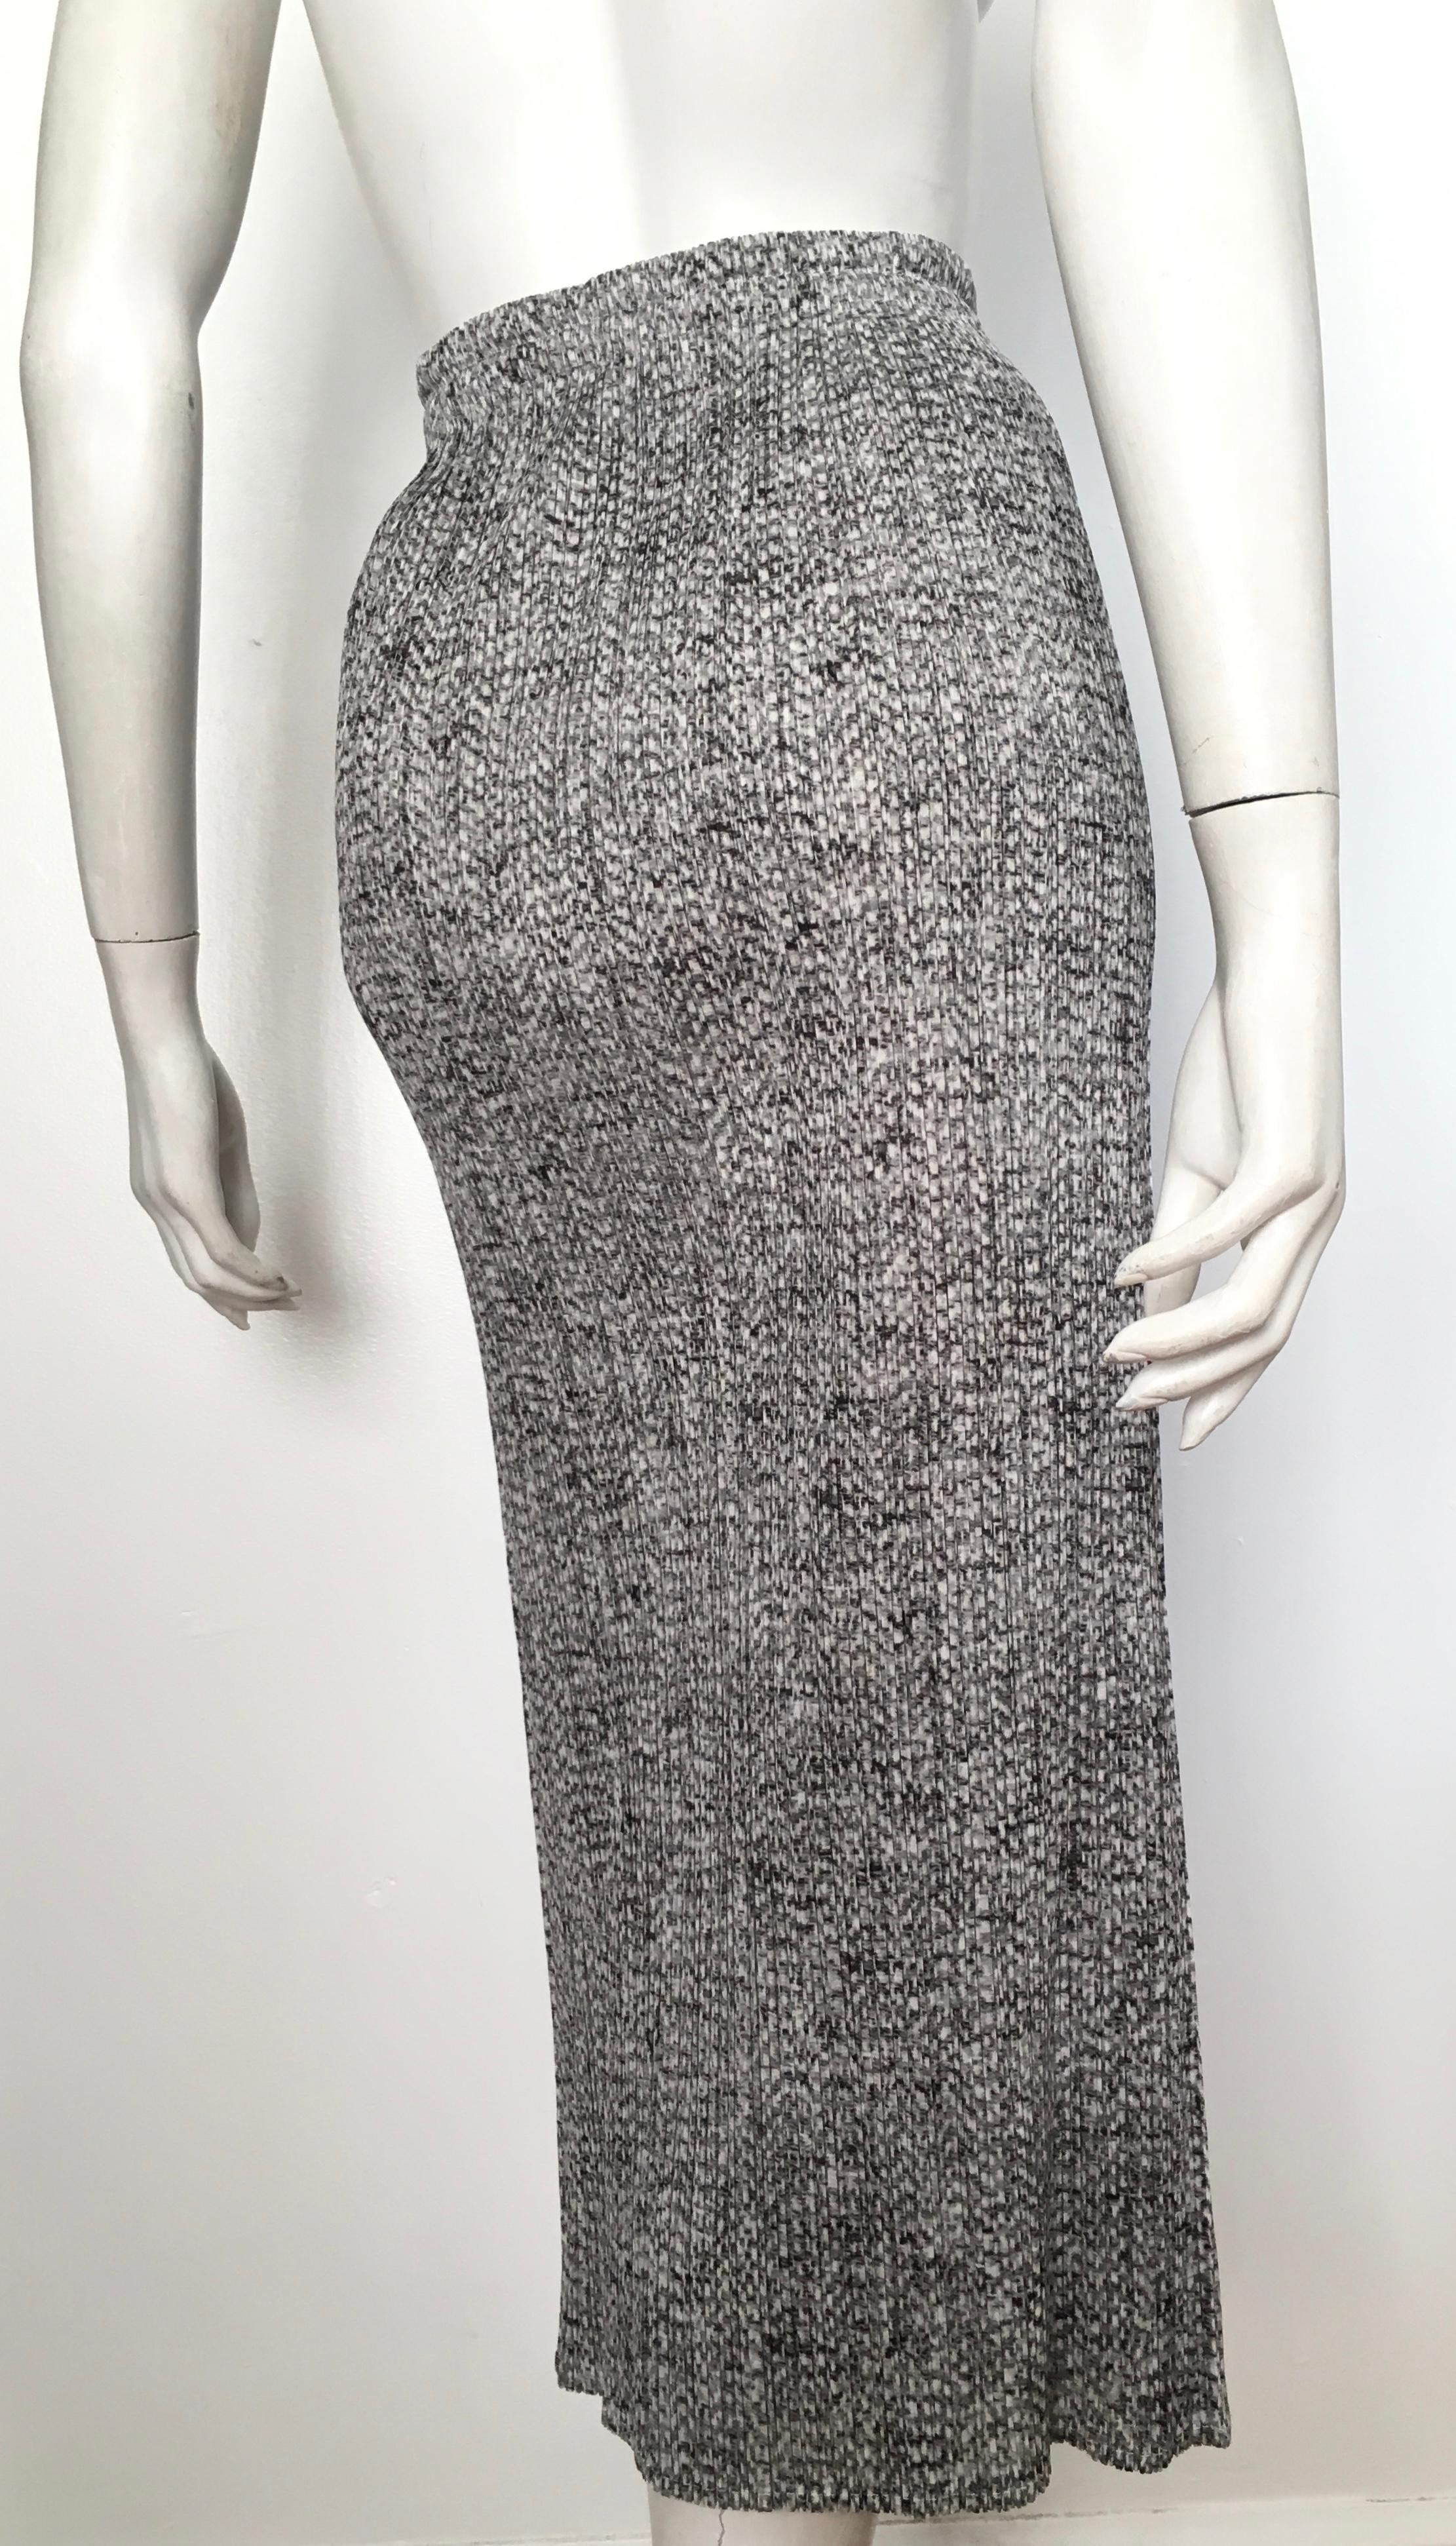 Issey Miyake Pleats Please 1990s Black & White Long Skirt Size Small. 2